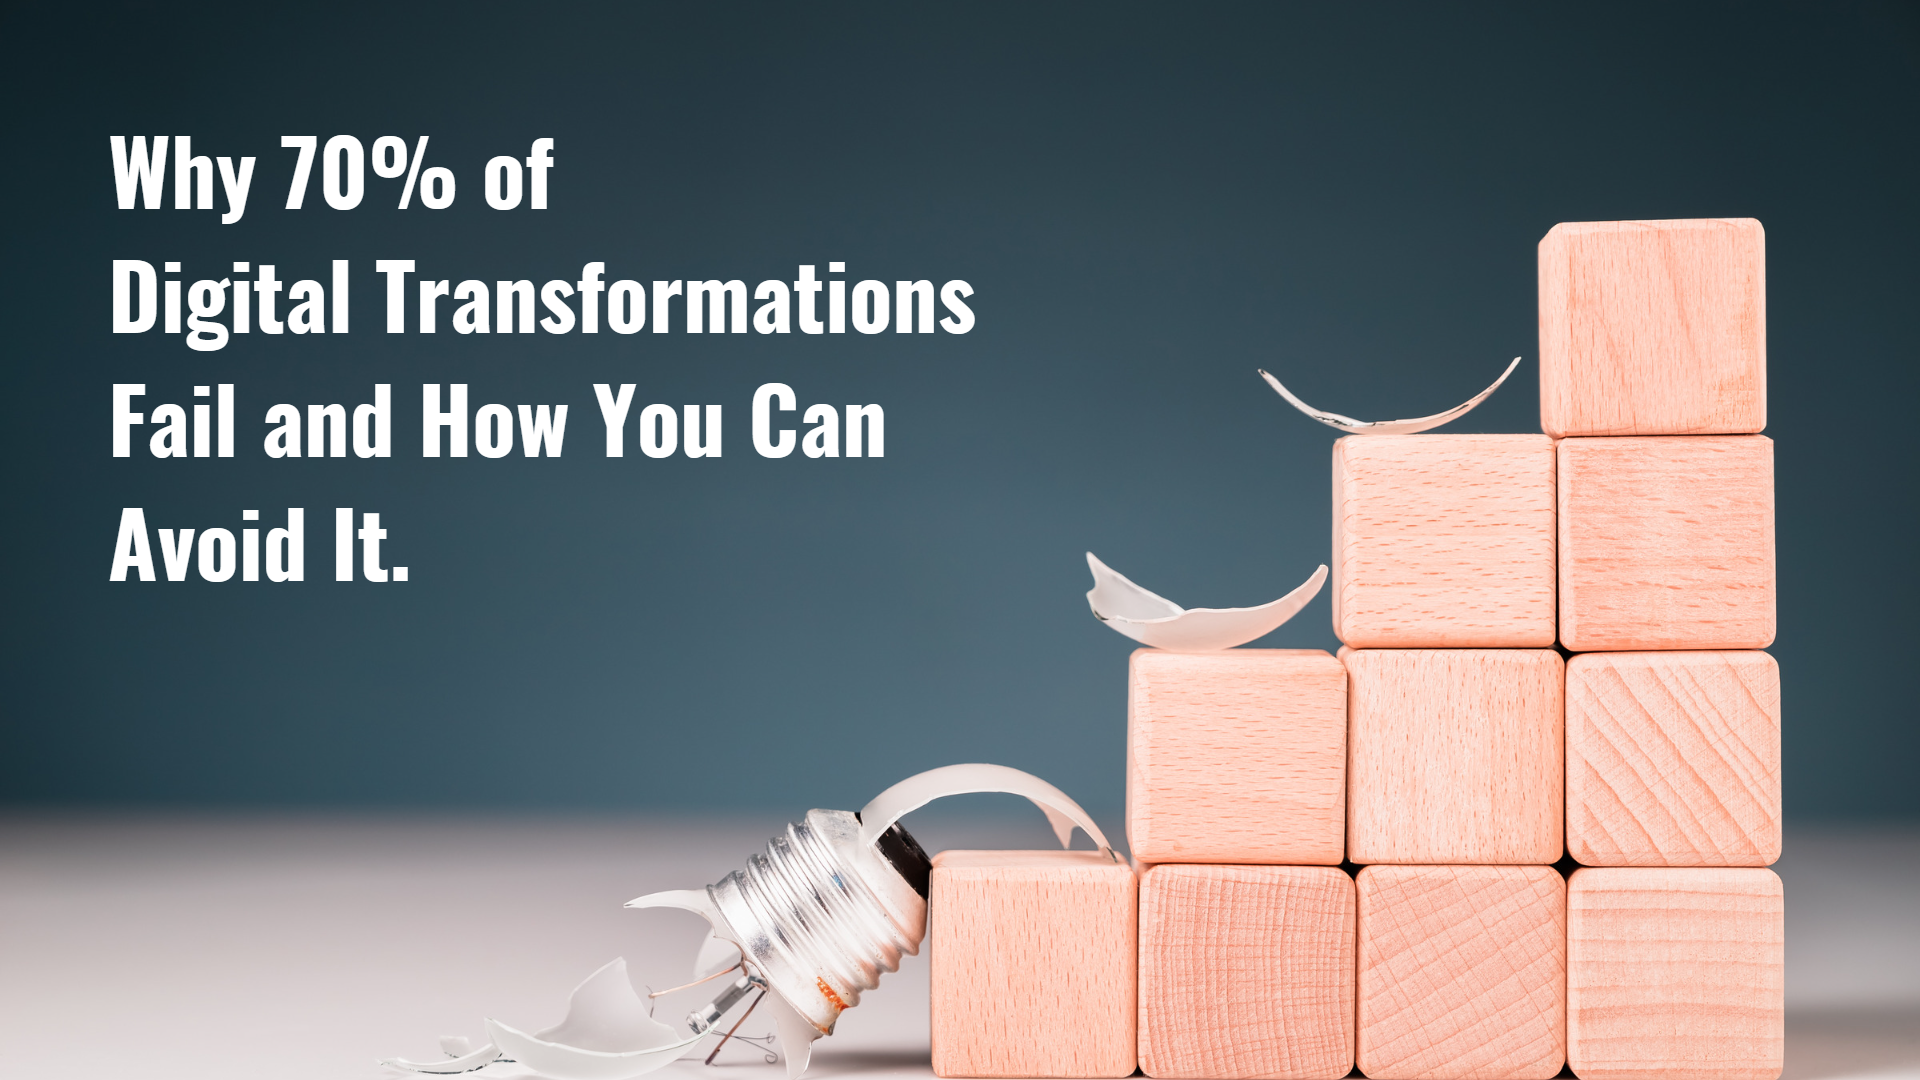 why 70% of Digital Transformations fail and how to avoid it.